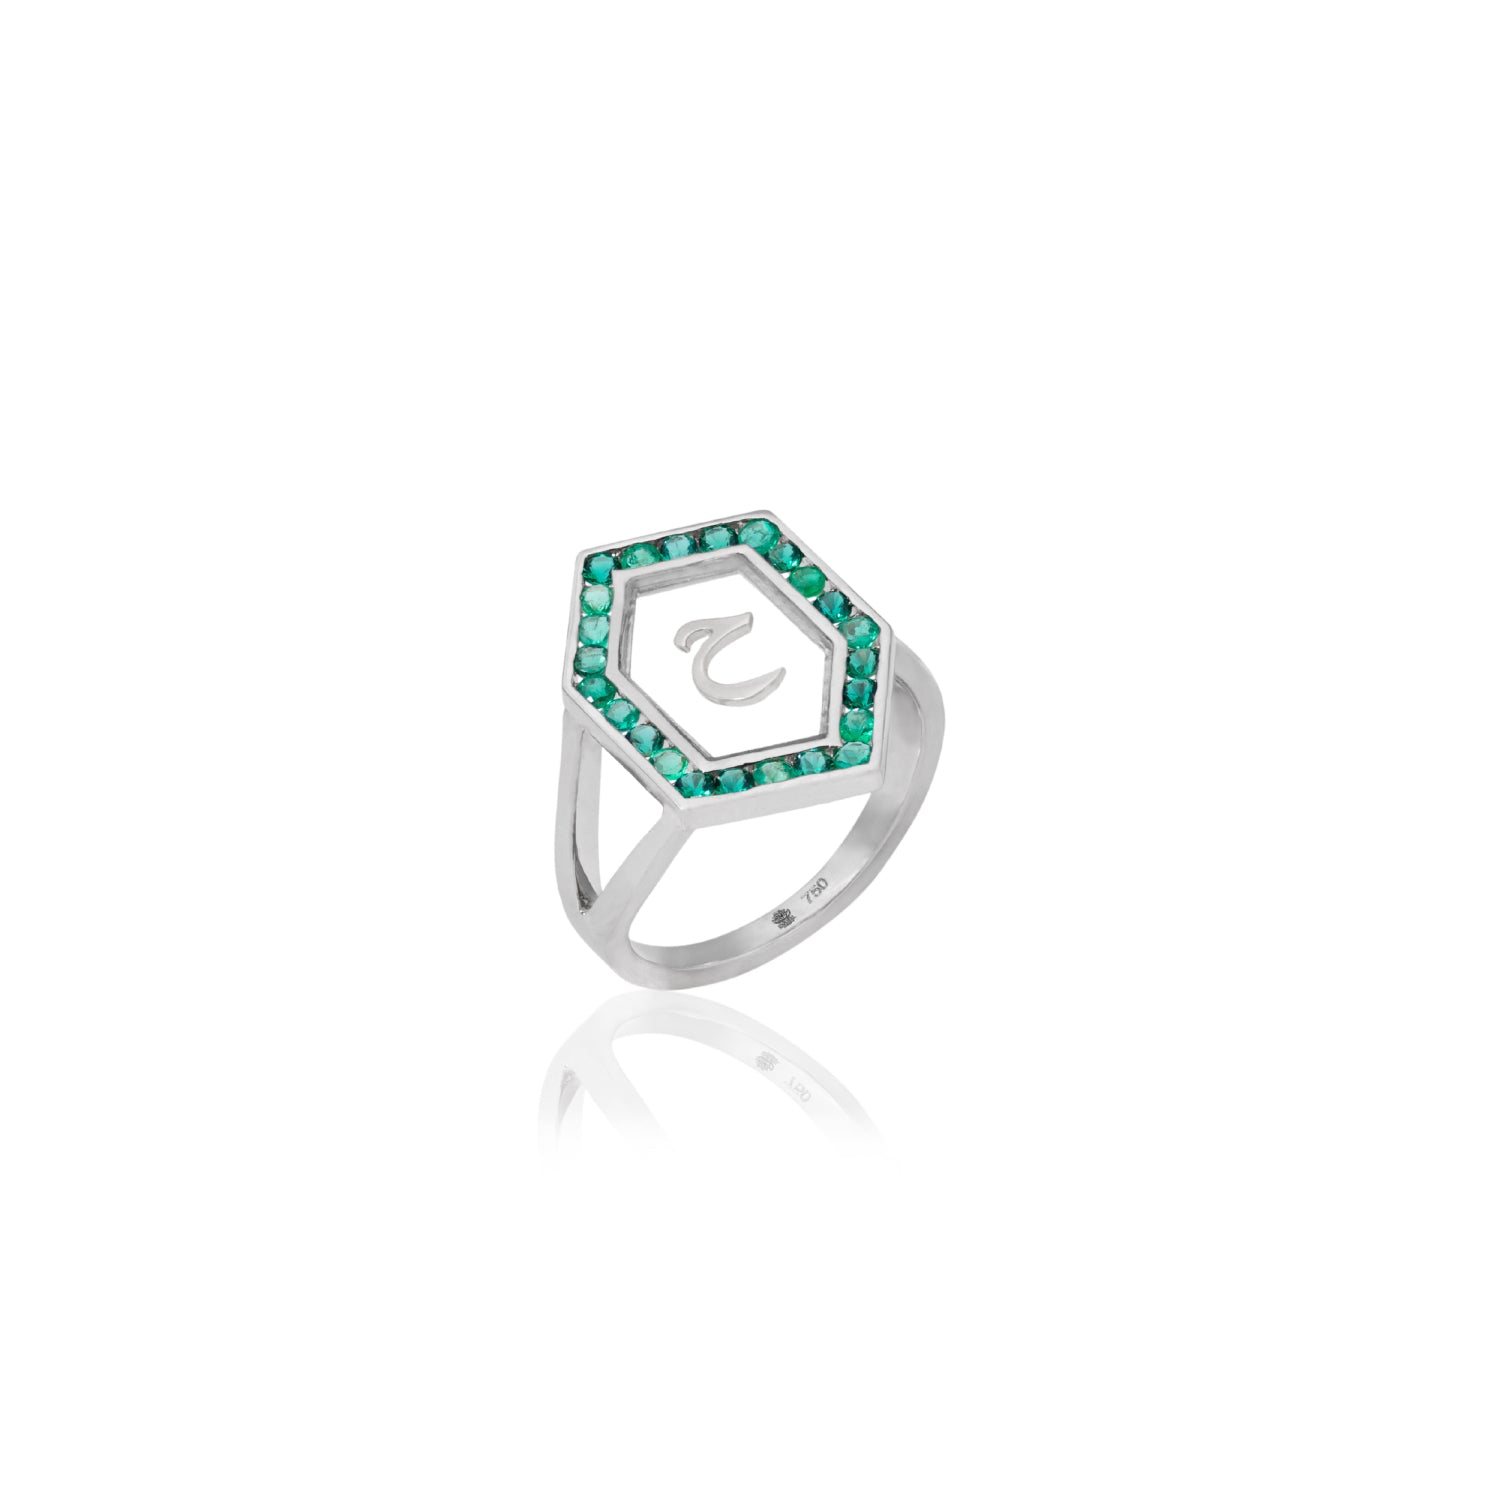 Qamoos 1.0 Letter ح Emerald Ring in White Gold